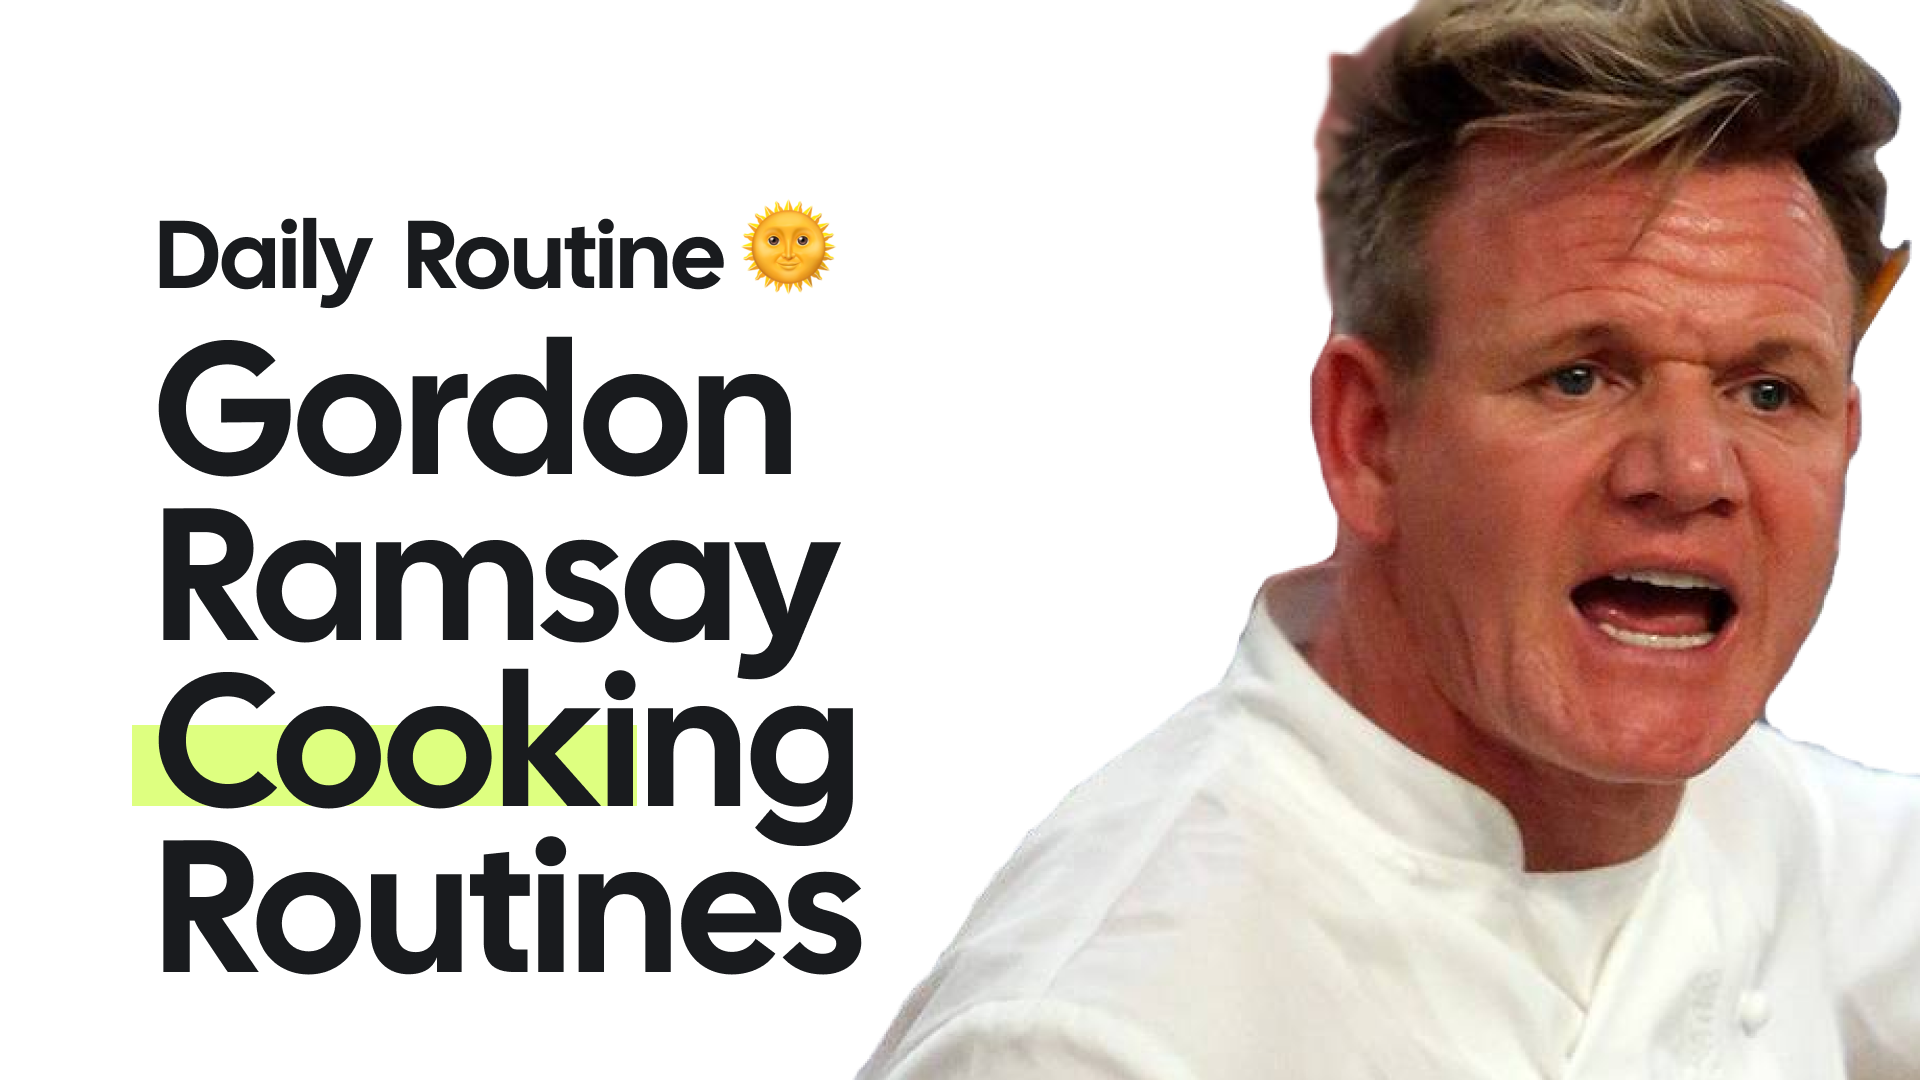 Gordon Ramsay's Cooking Routines